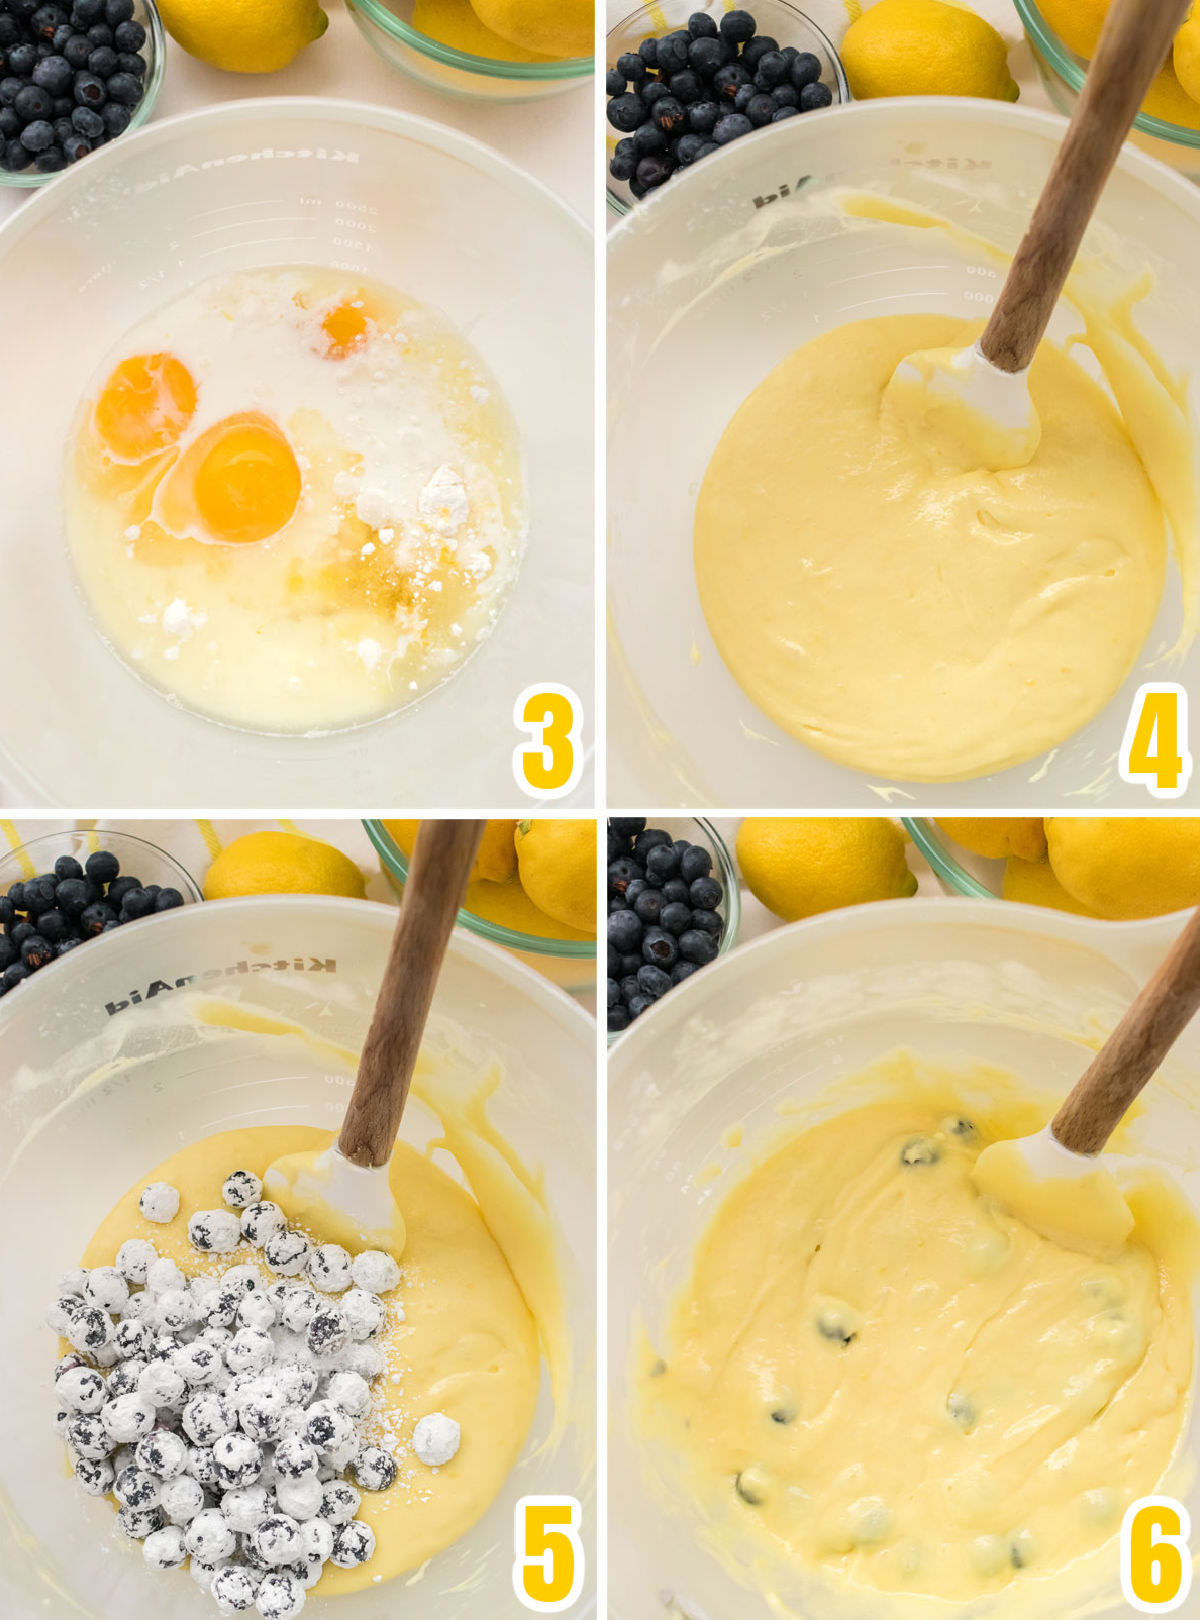 Collage image showing the steps for making the Lemon Blueberry Cupcake batter.